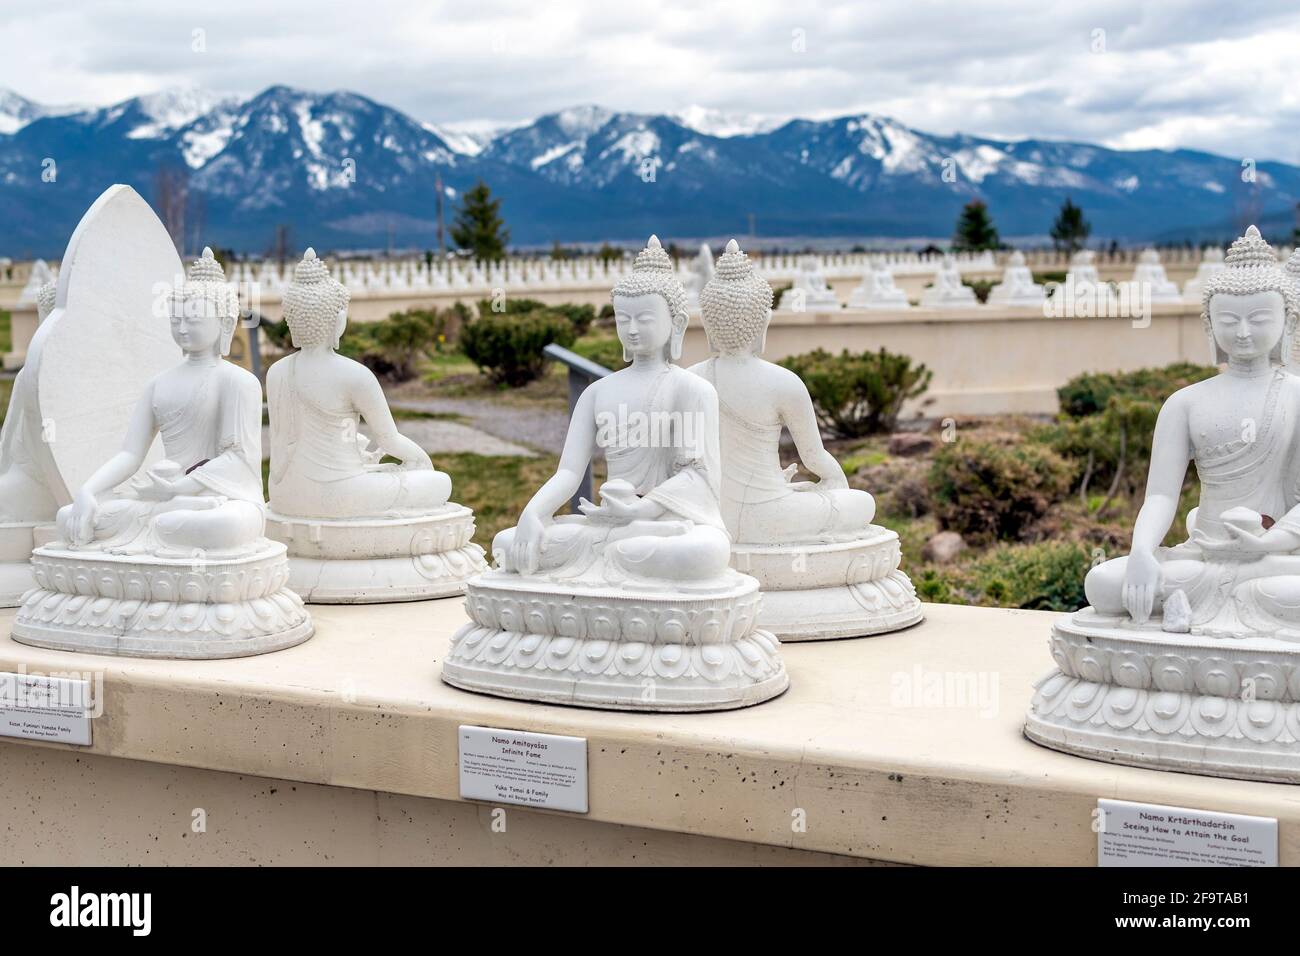 Rows of Buddhas line up with the snow covered mountains of Montana behind at the Garden of One Thousand Buddhas. Stock Photo